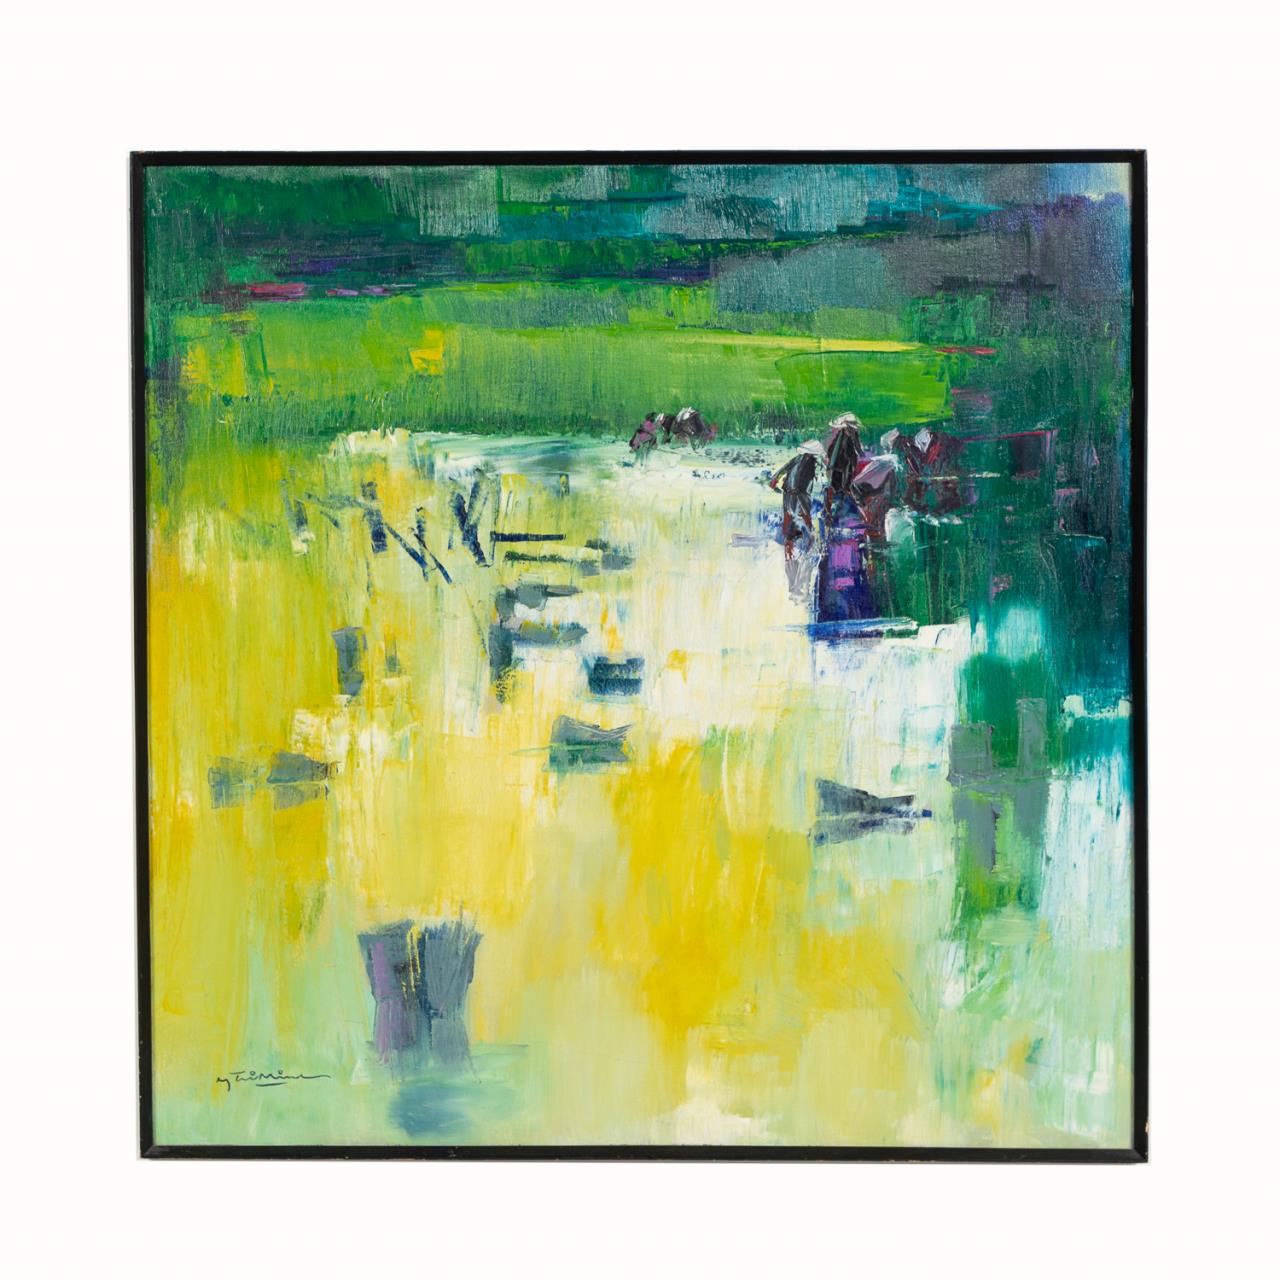 NGUYEN TRIMINH, MCM ABSTRACT OIL